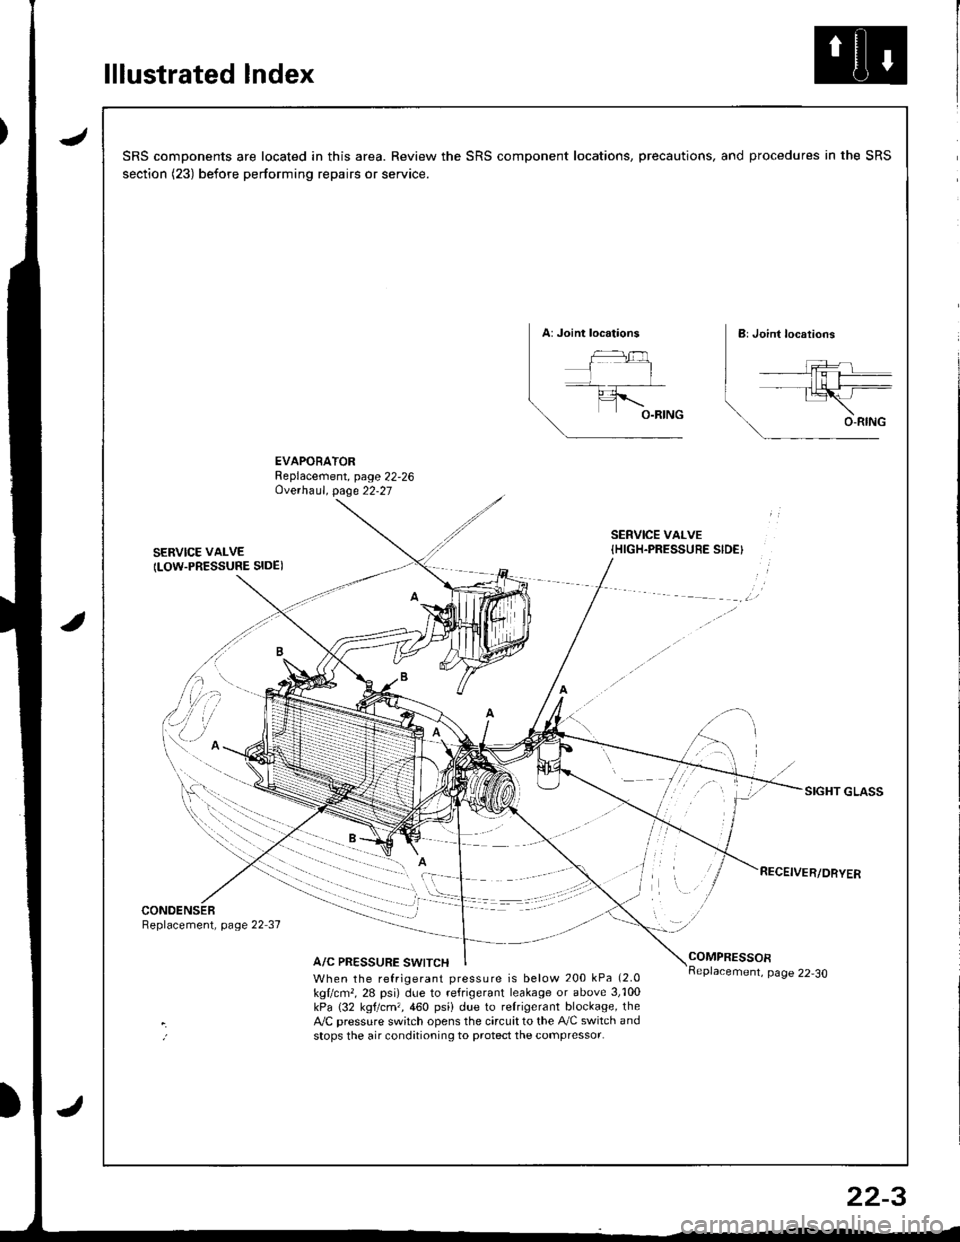 HONDA INTEGRA 1998 4.G Workshop Manual lllustrated Index
JSRS components are located in this area. Review the SRS component locations, precautions, and procedures in the SRS
section (23) before performing repairs or service.
EVAPORATORRepl